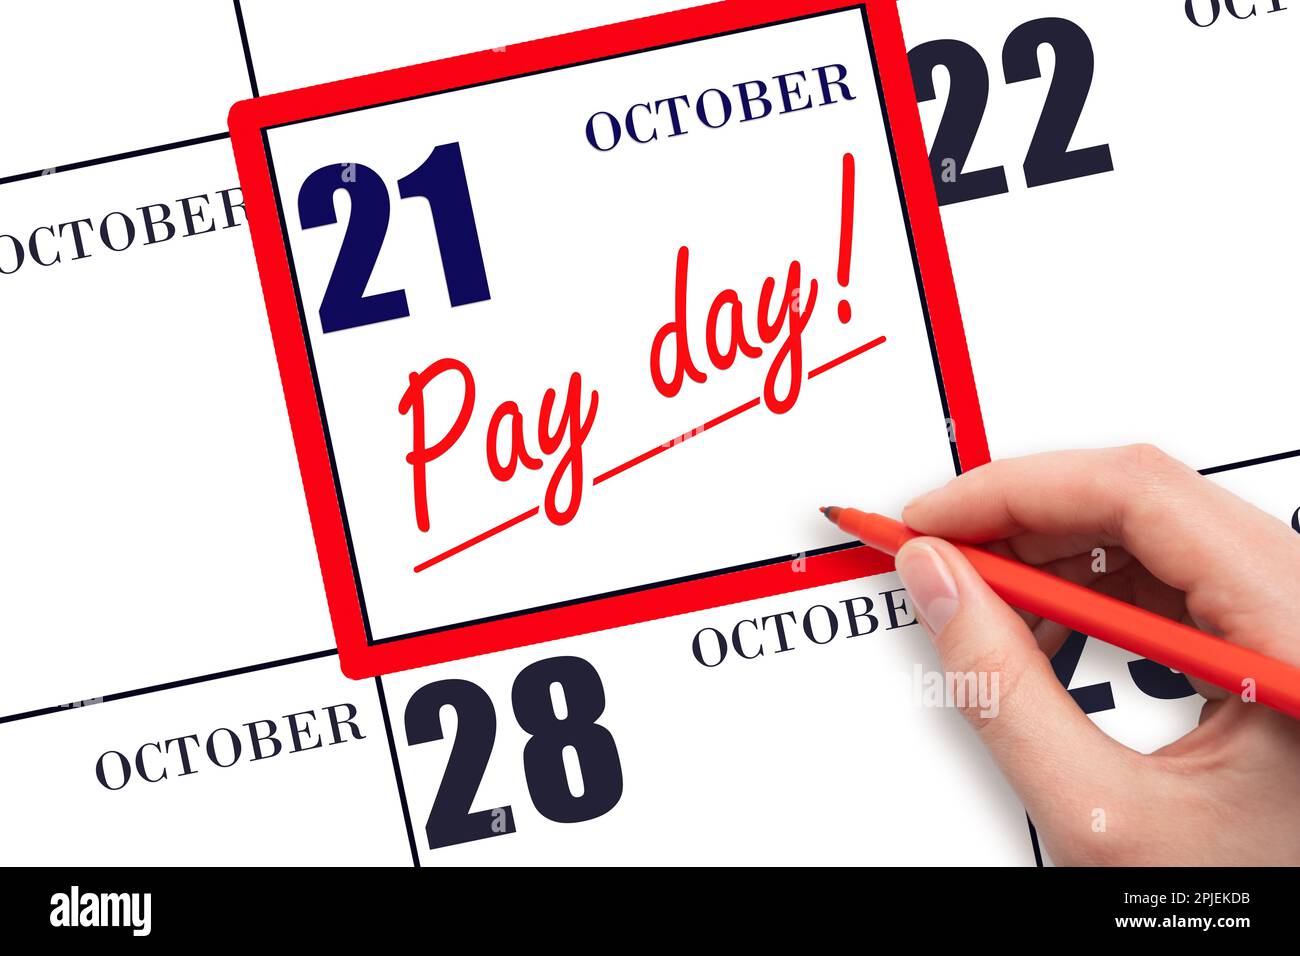 21st day of October. Hand writing text PAY DATE on calendar date October 21 and underline it. Payment due date. Reminder concept of payment. Autumn mo Stock Photo